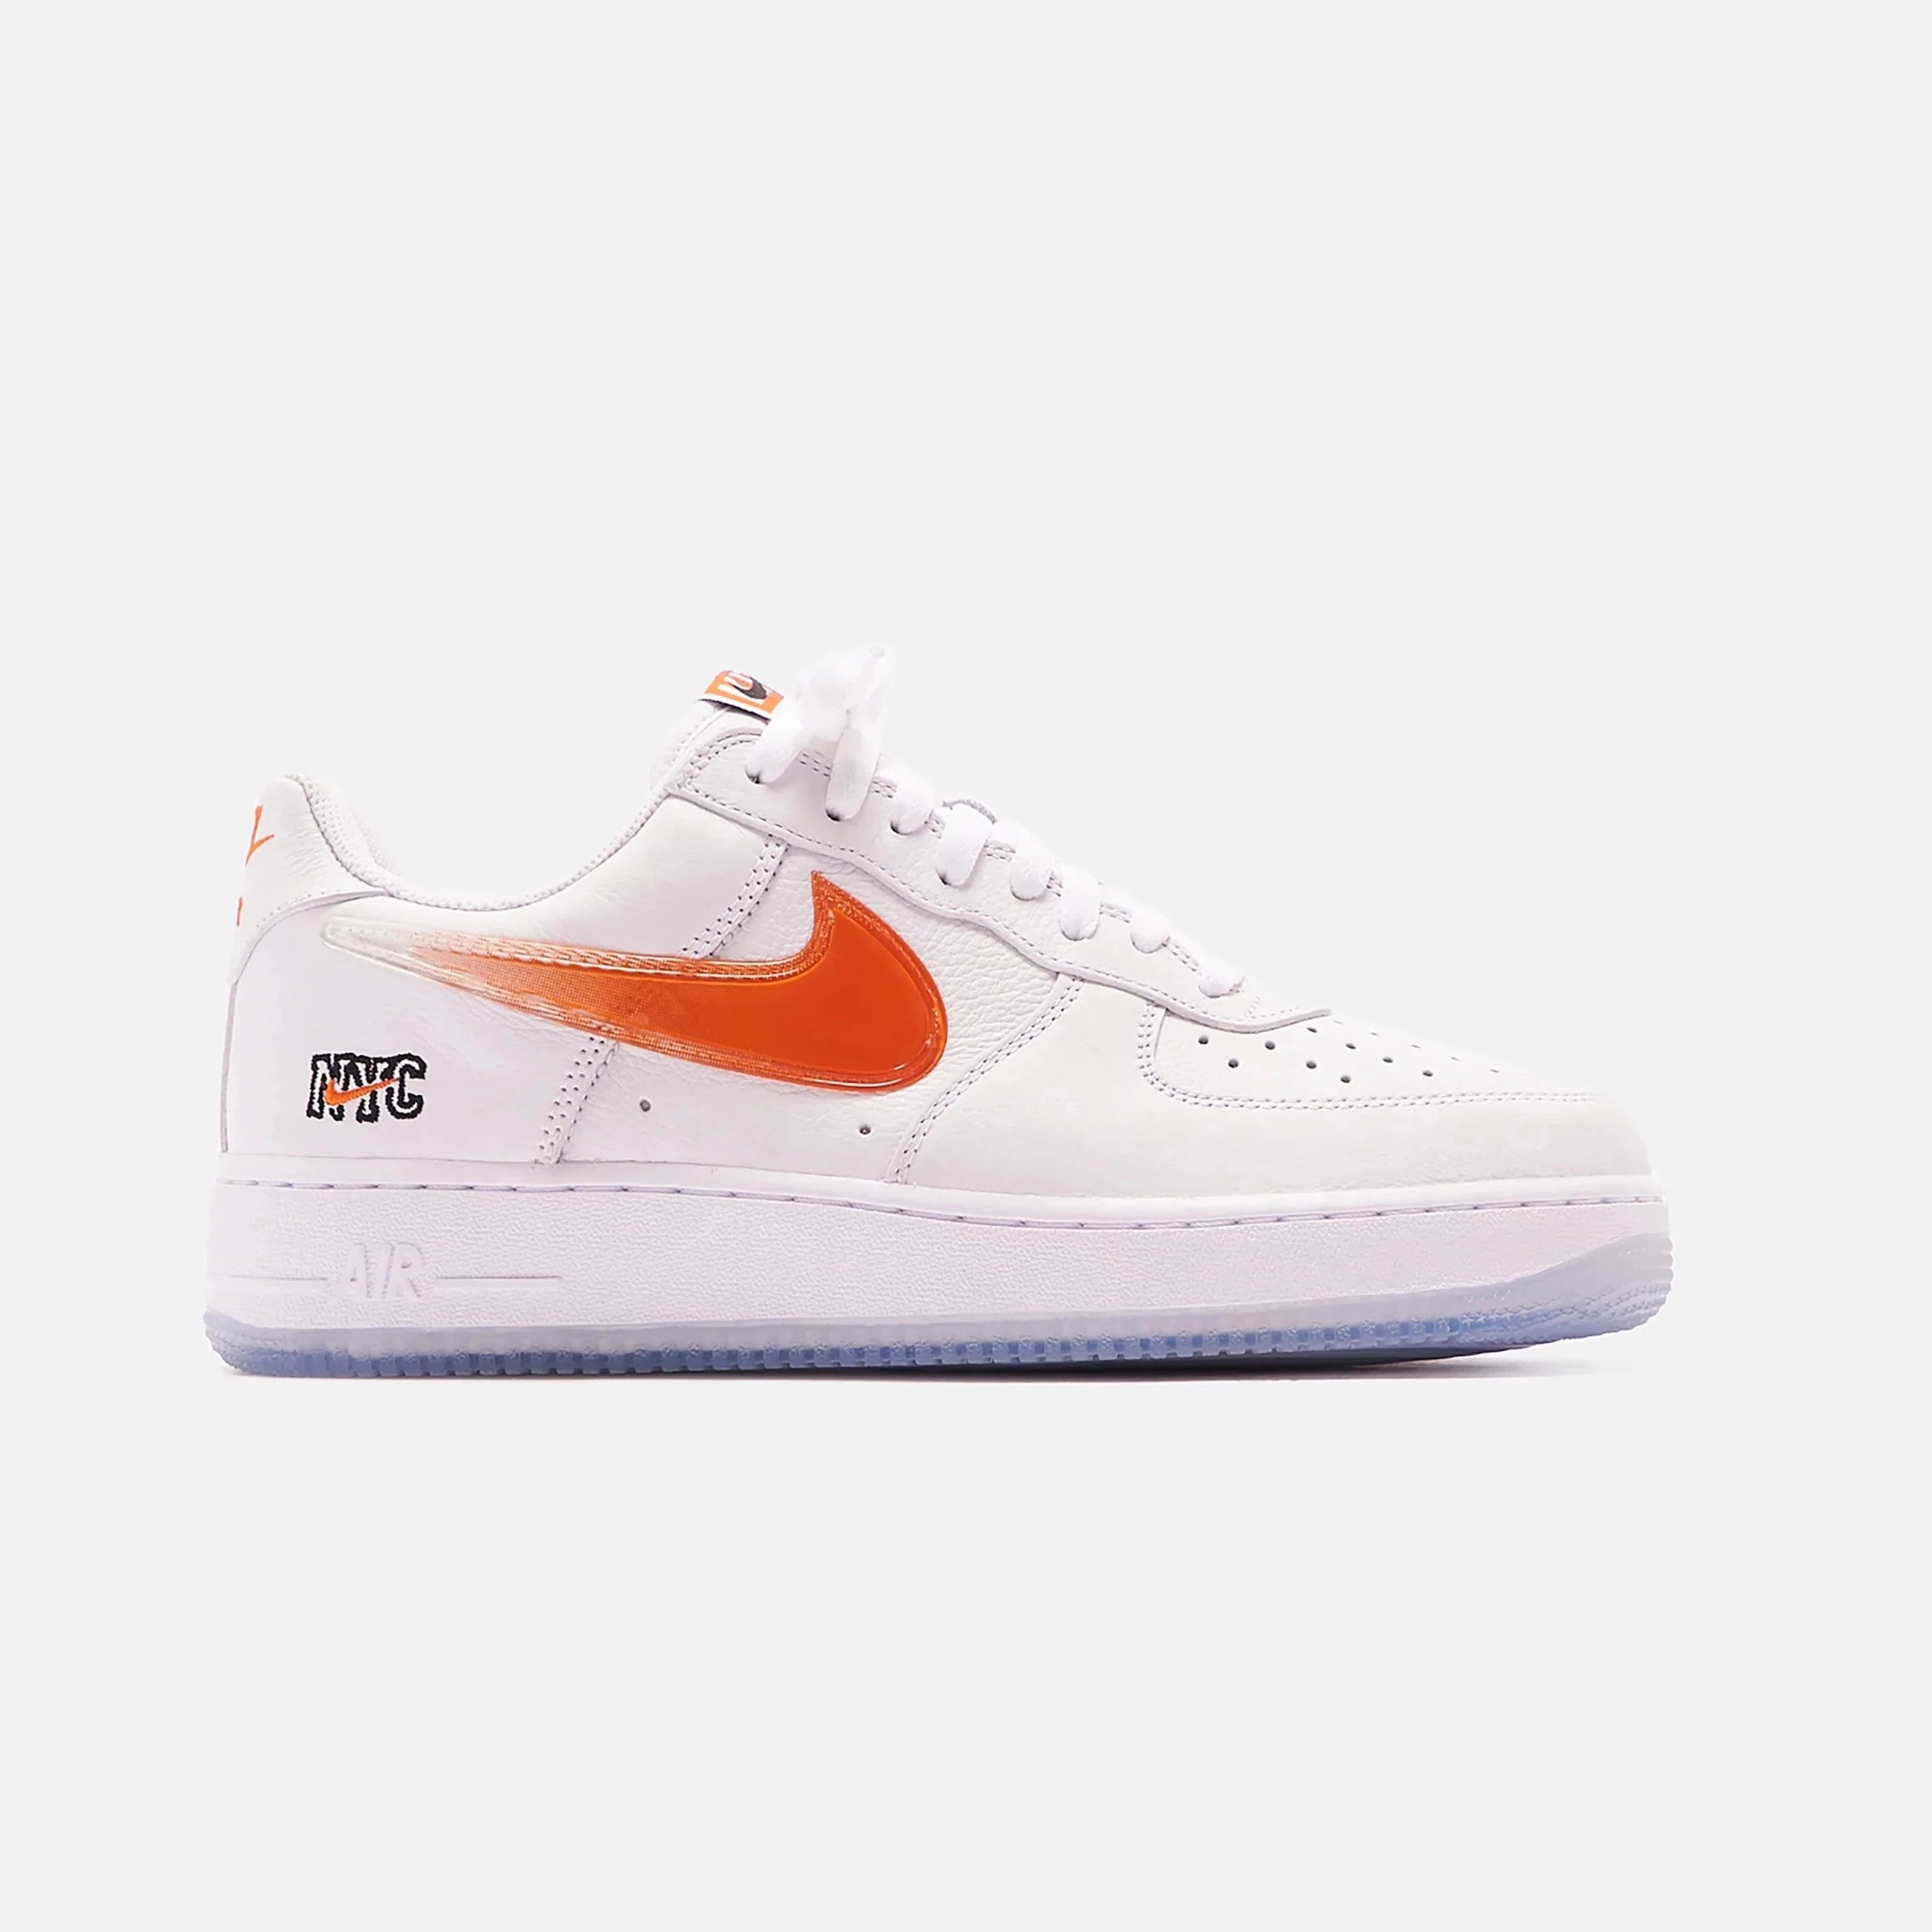 Air Force 1 Low White Kith 'NYC Home'